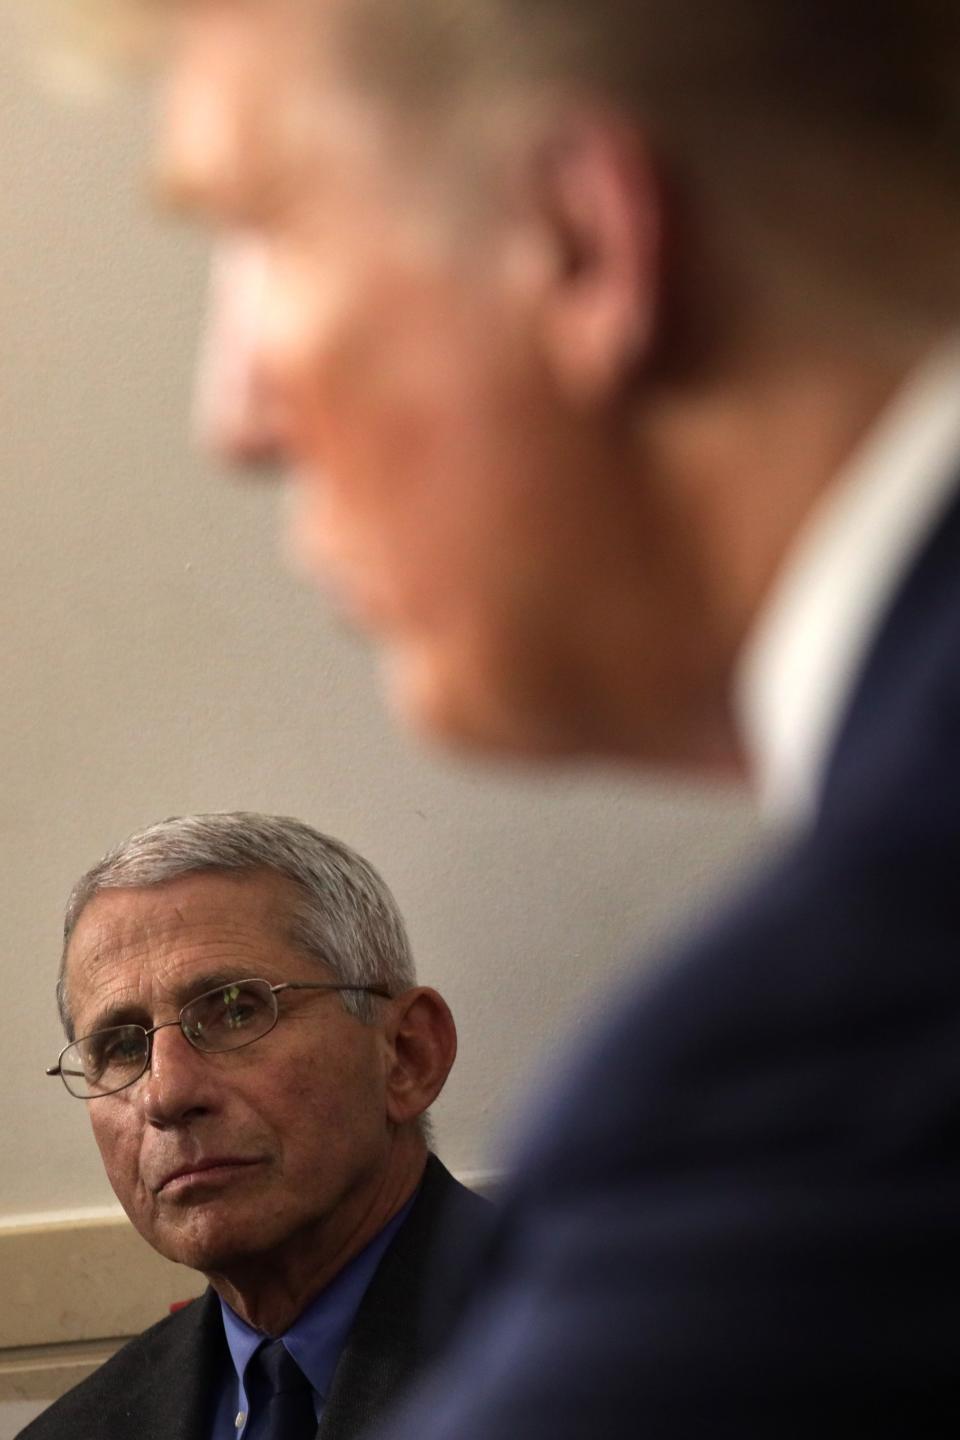 Fauci looks on as Trump addresses the press in the White House on April 13, 2020.